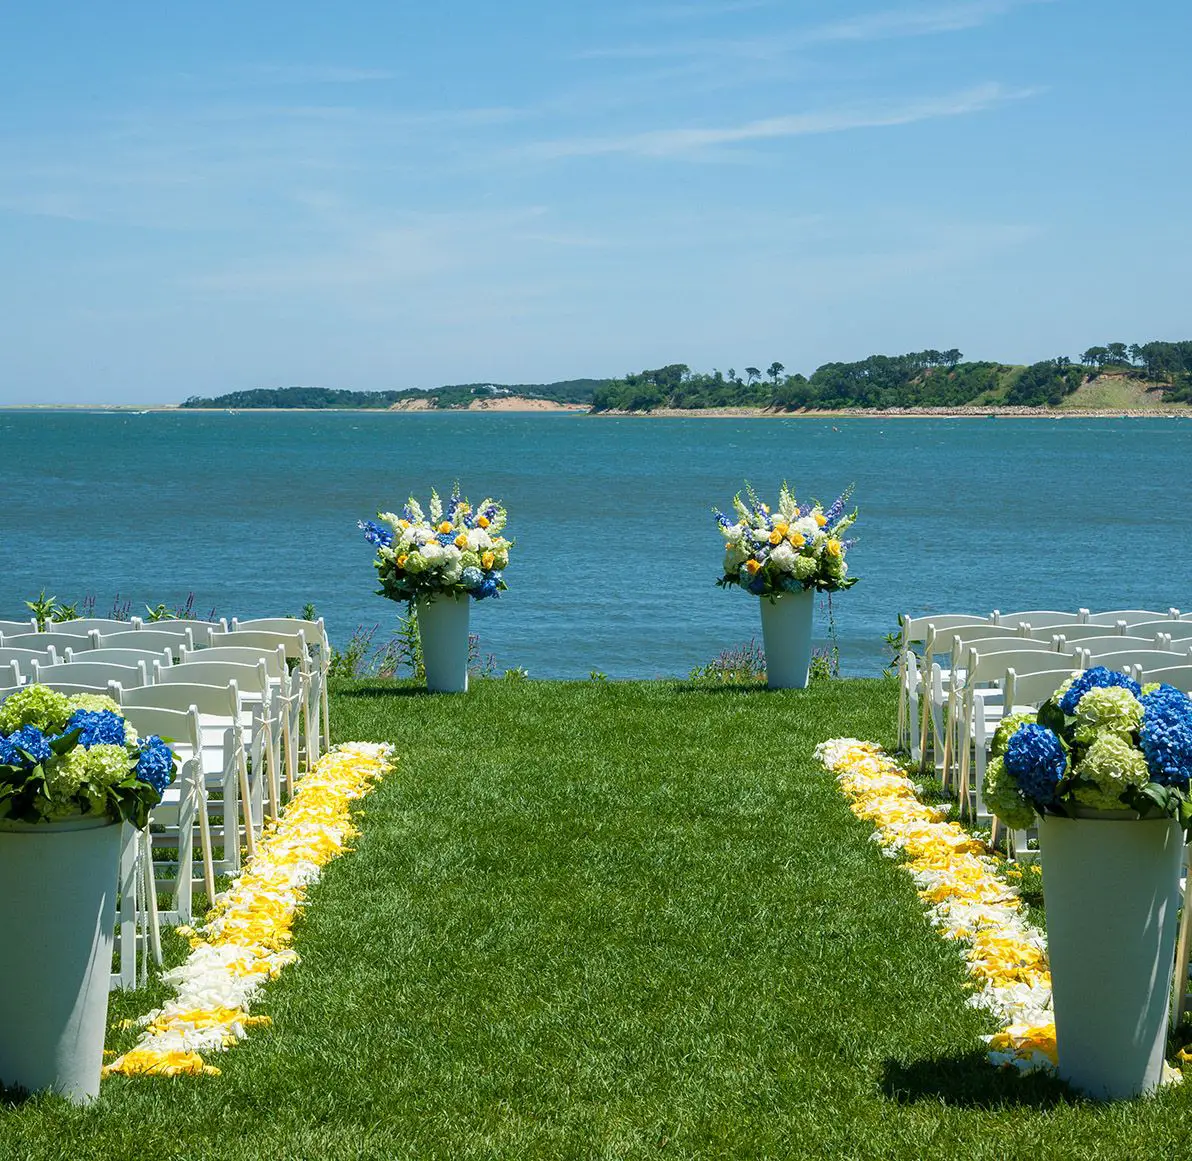 Expanded Grand Lawn #wequassett #capecod #weddings